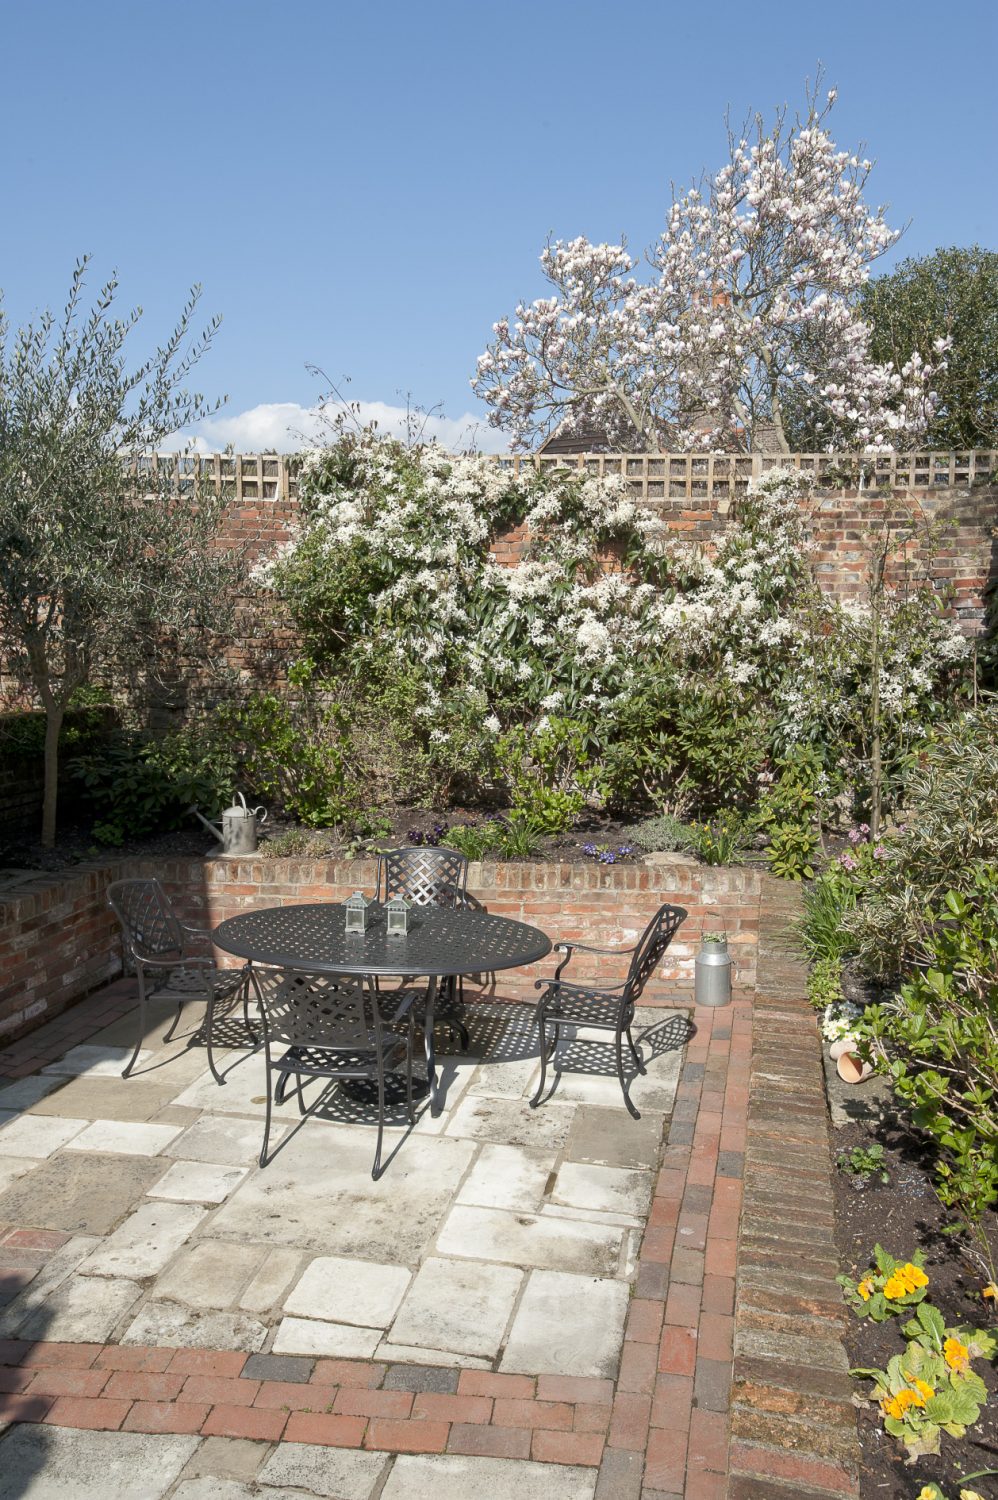 The peaceful, sheltered courtyard features high walls covered in climbing roses and fragrant clematis armandii. Raised brick beds are planted with hydrangeas, camellias, lavender and pinks